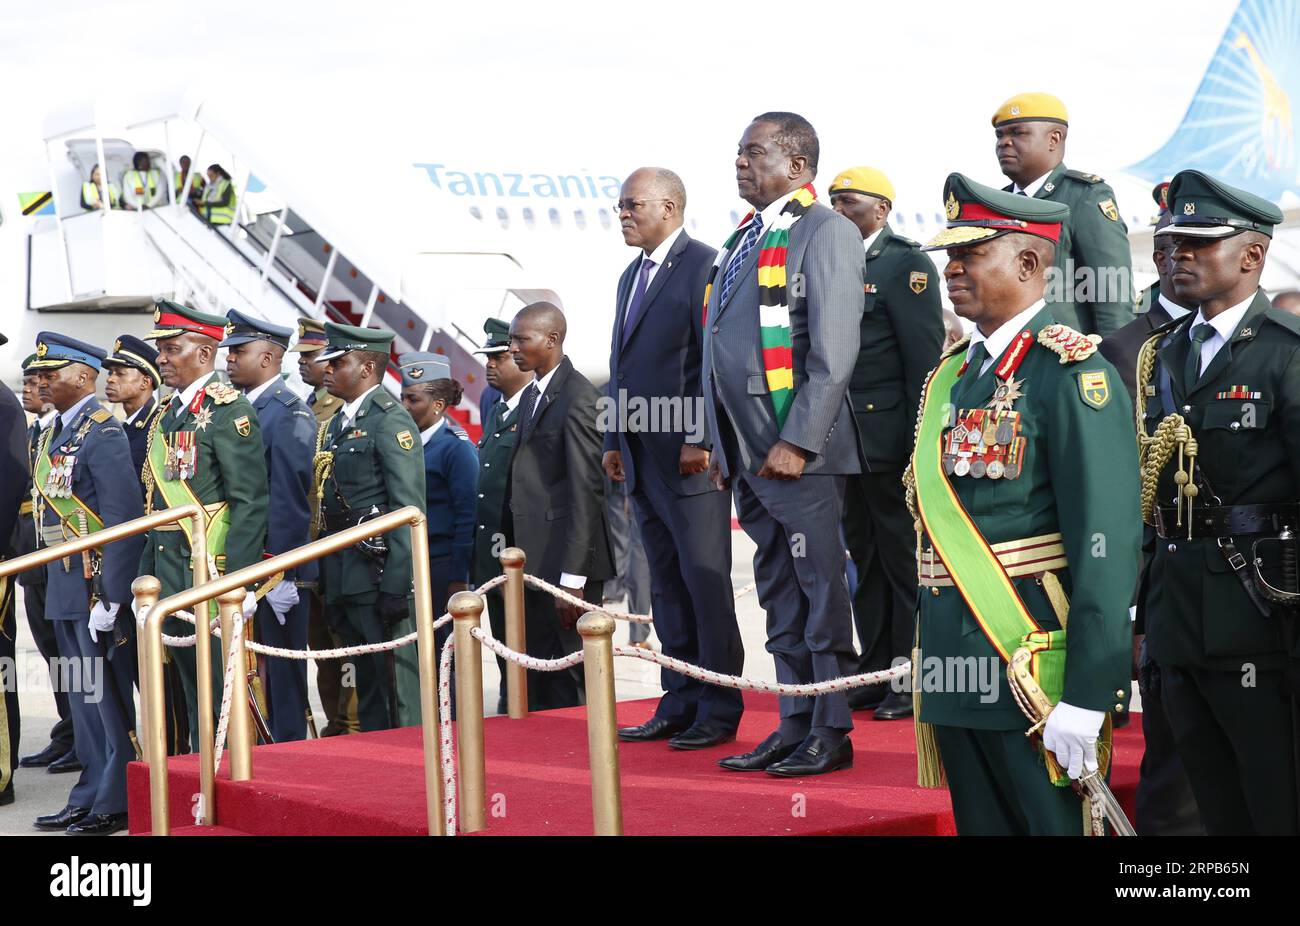 (190528) -- HARARE, May 28, 2019 -- Zimbabwean President Emmerson Mnangagwa (R, Front, on stage) welcomes Tanzanian President John Magufuli (L, Front, on stage) at the Robert Gabriel Mugabe International Airport in Harare, Zimbabwe, on May 28, 2019. Visiting Tanzanian President John Magufuli arrived in Zimbabwe on Tuesday for a two-day official visit. ) ZIMBABWE-HARARE-TANZANIA-PRESIDENT-VISIT ShaunxJusa PUBLICATIONxNOTxINxCHN Stock Photo